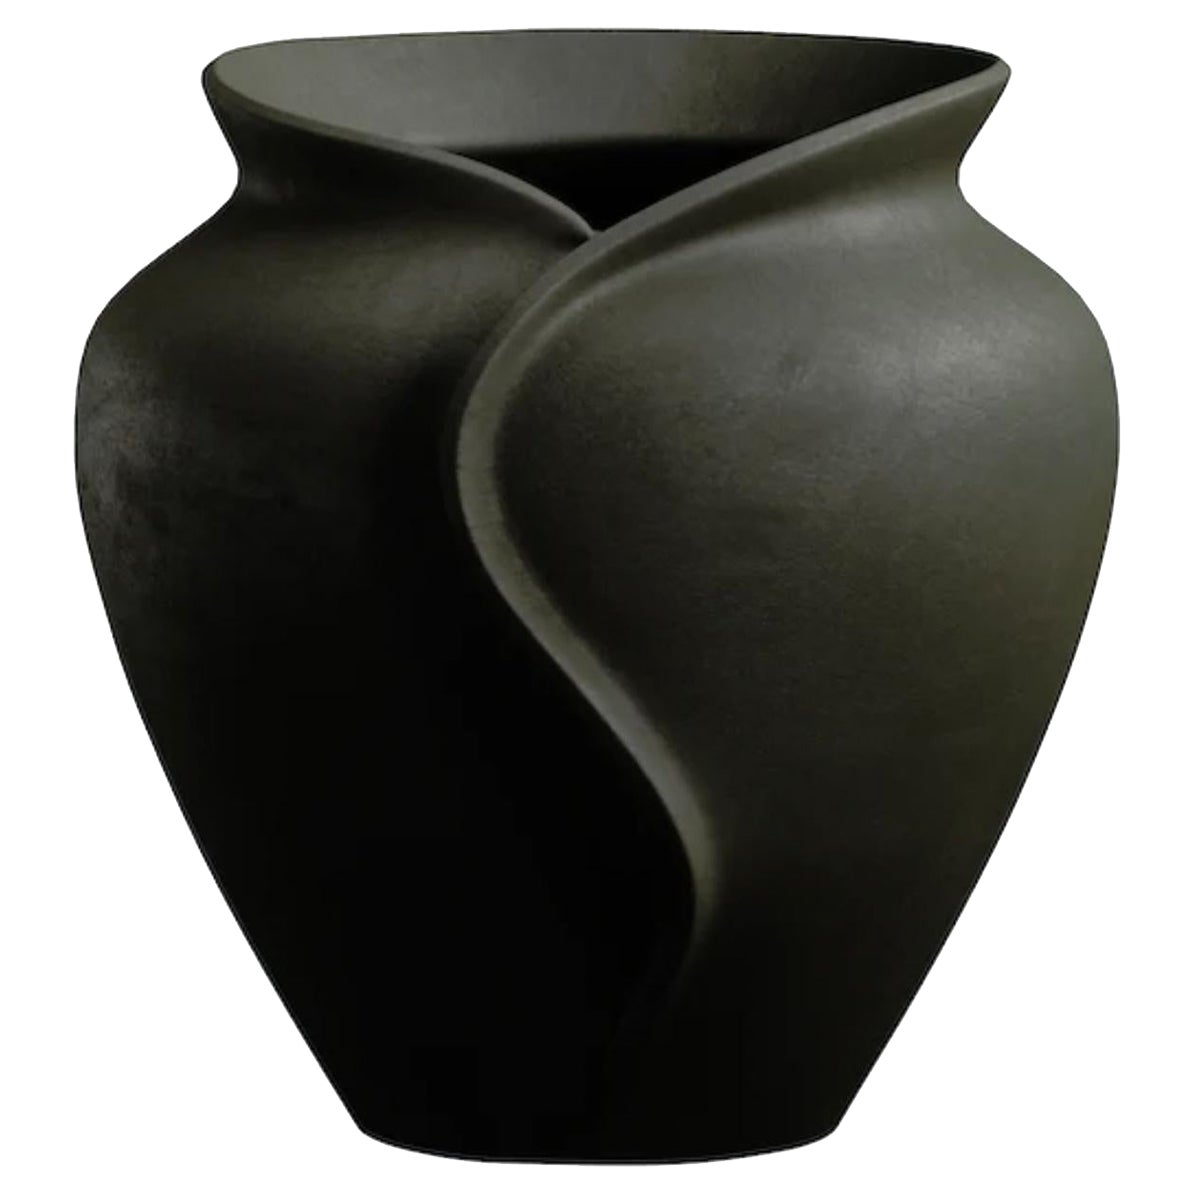 The Collar series, handmade from stoneware, are bold yet sensual in design. The medium planter is just the right size, and the curves and proportion will make a statement in any room styled with a plant or as a stand-alone form.

Available in matte